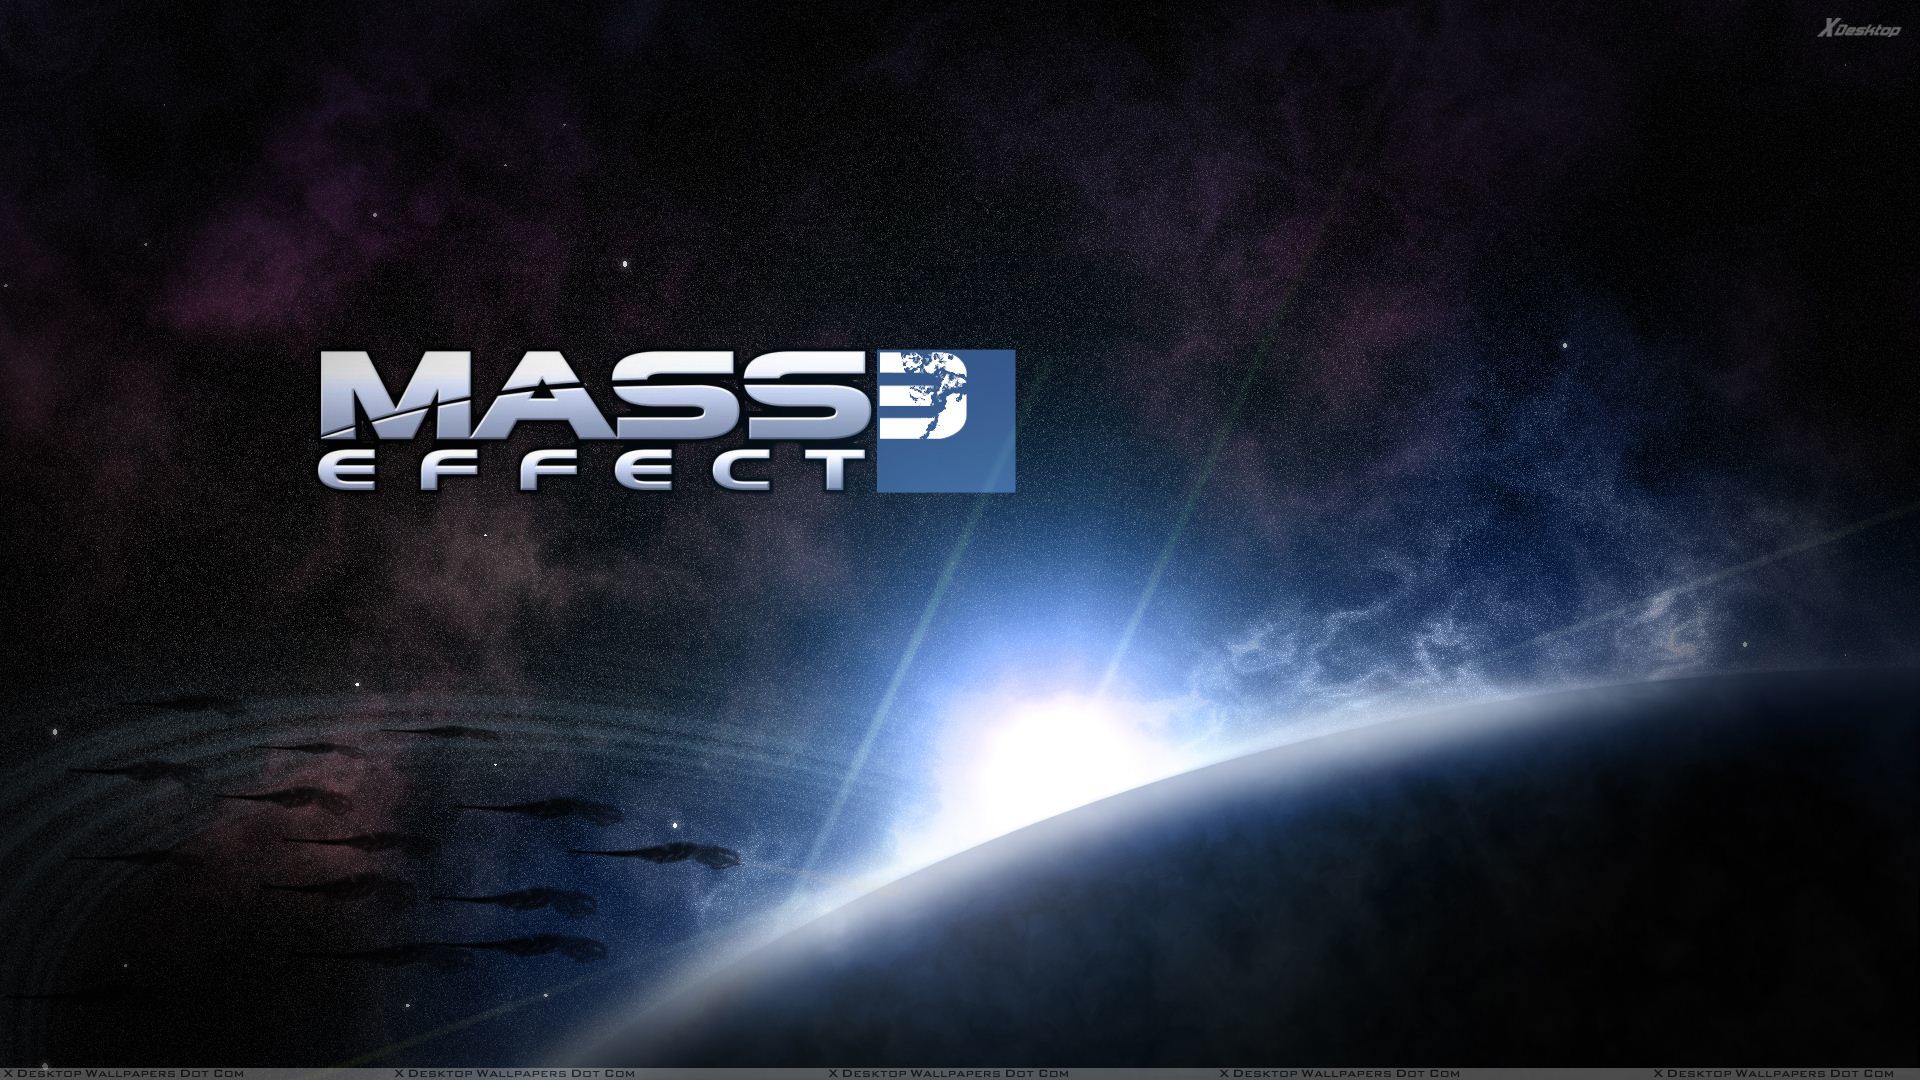 1920x1080 You are viewing wallpaper titled "Mass Effect 3 ...